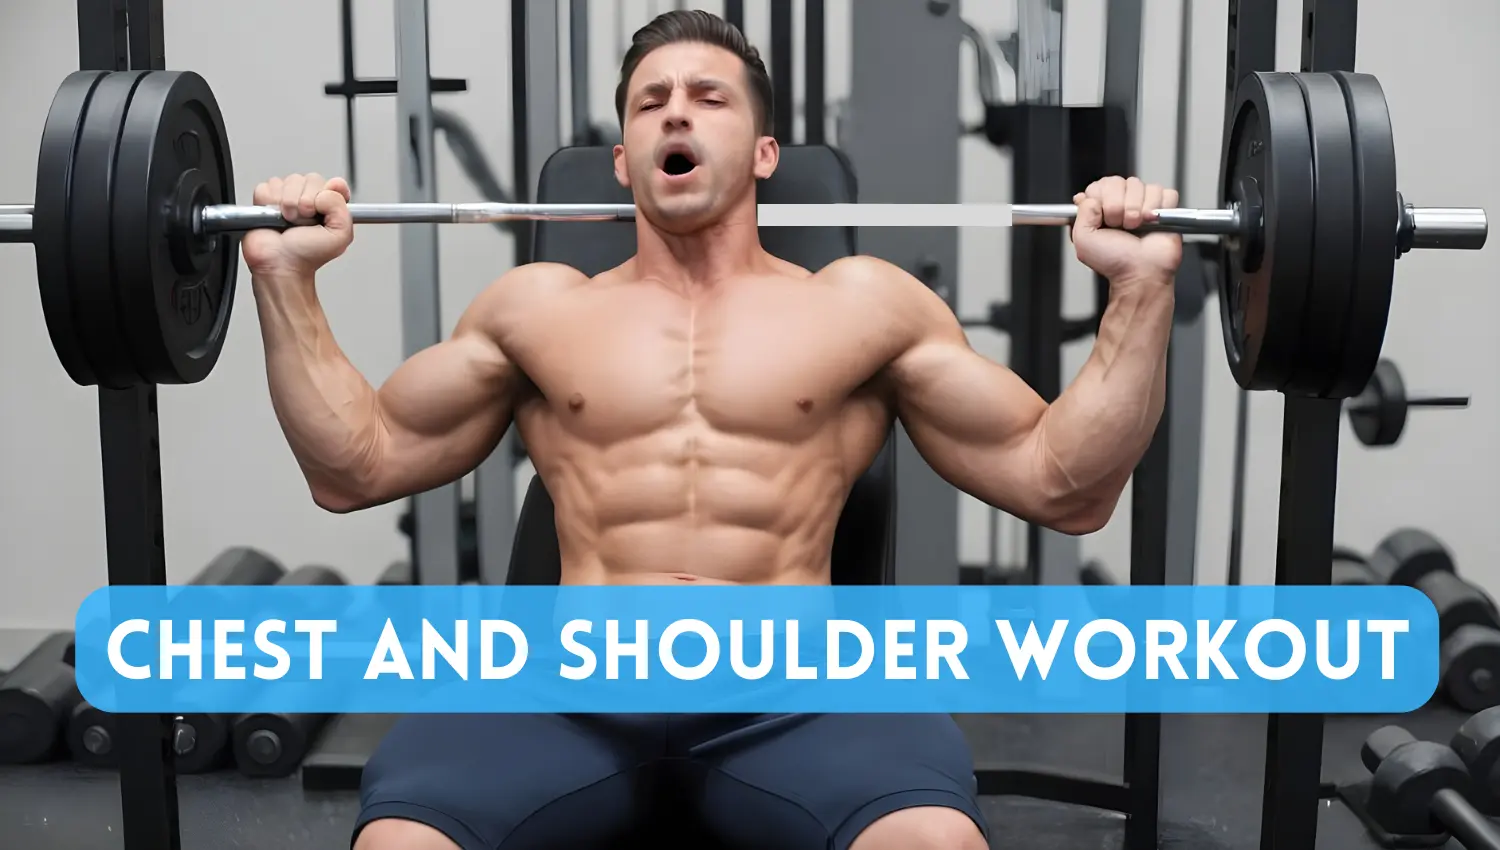 You are currently viewing Maximizing Upper Body Gains with Good Chest and Shoulder Workout